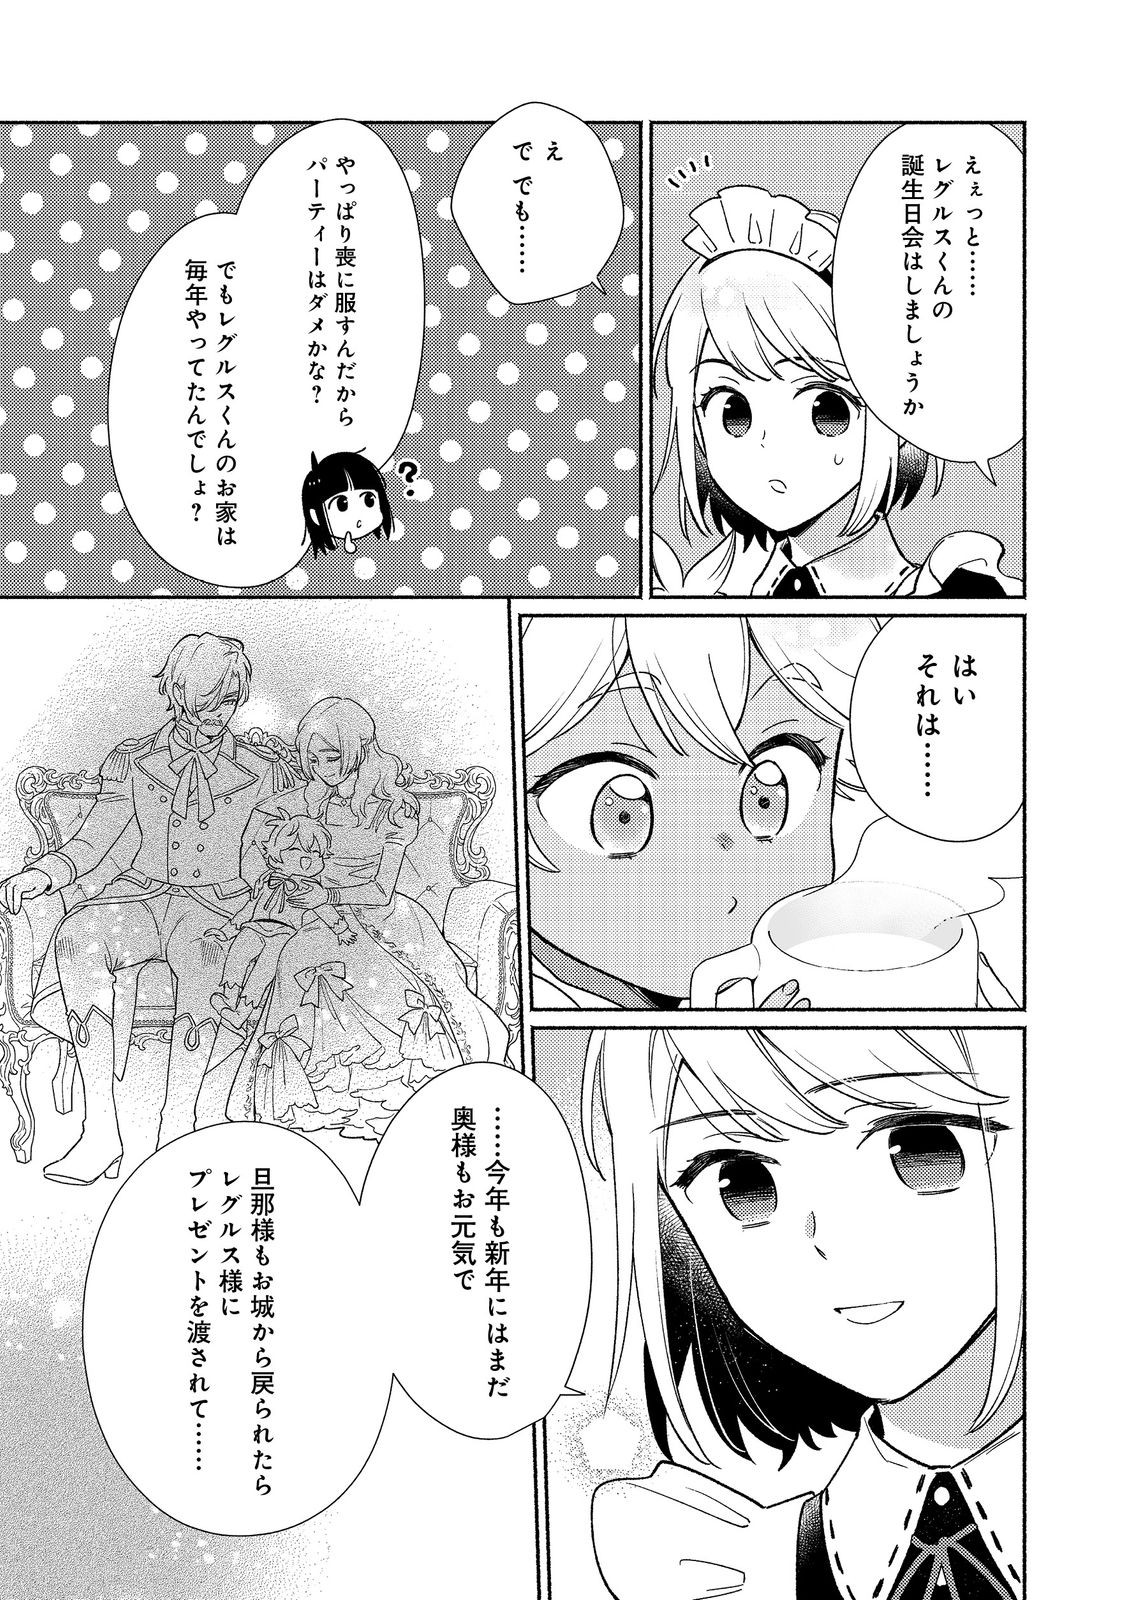 I’m the White Pig Nobleman 第24.1話 - Page 5